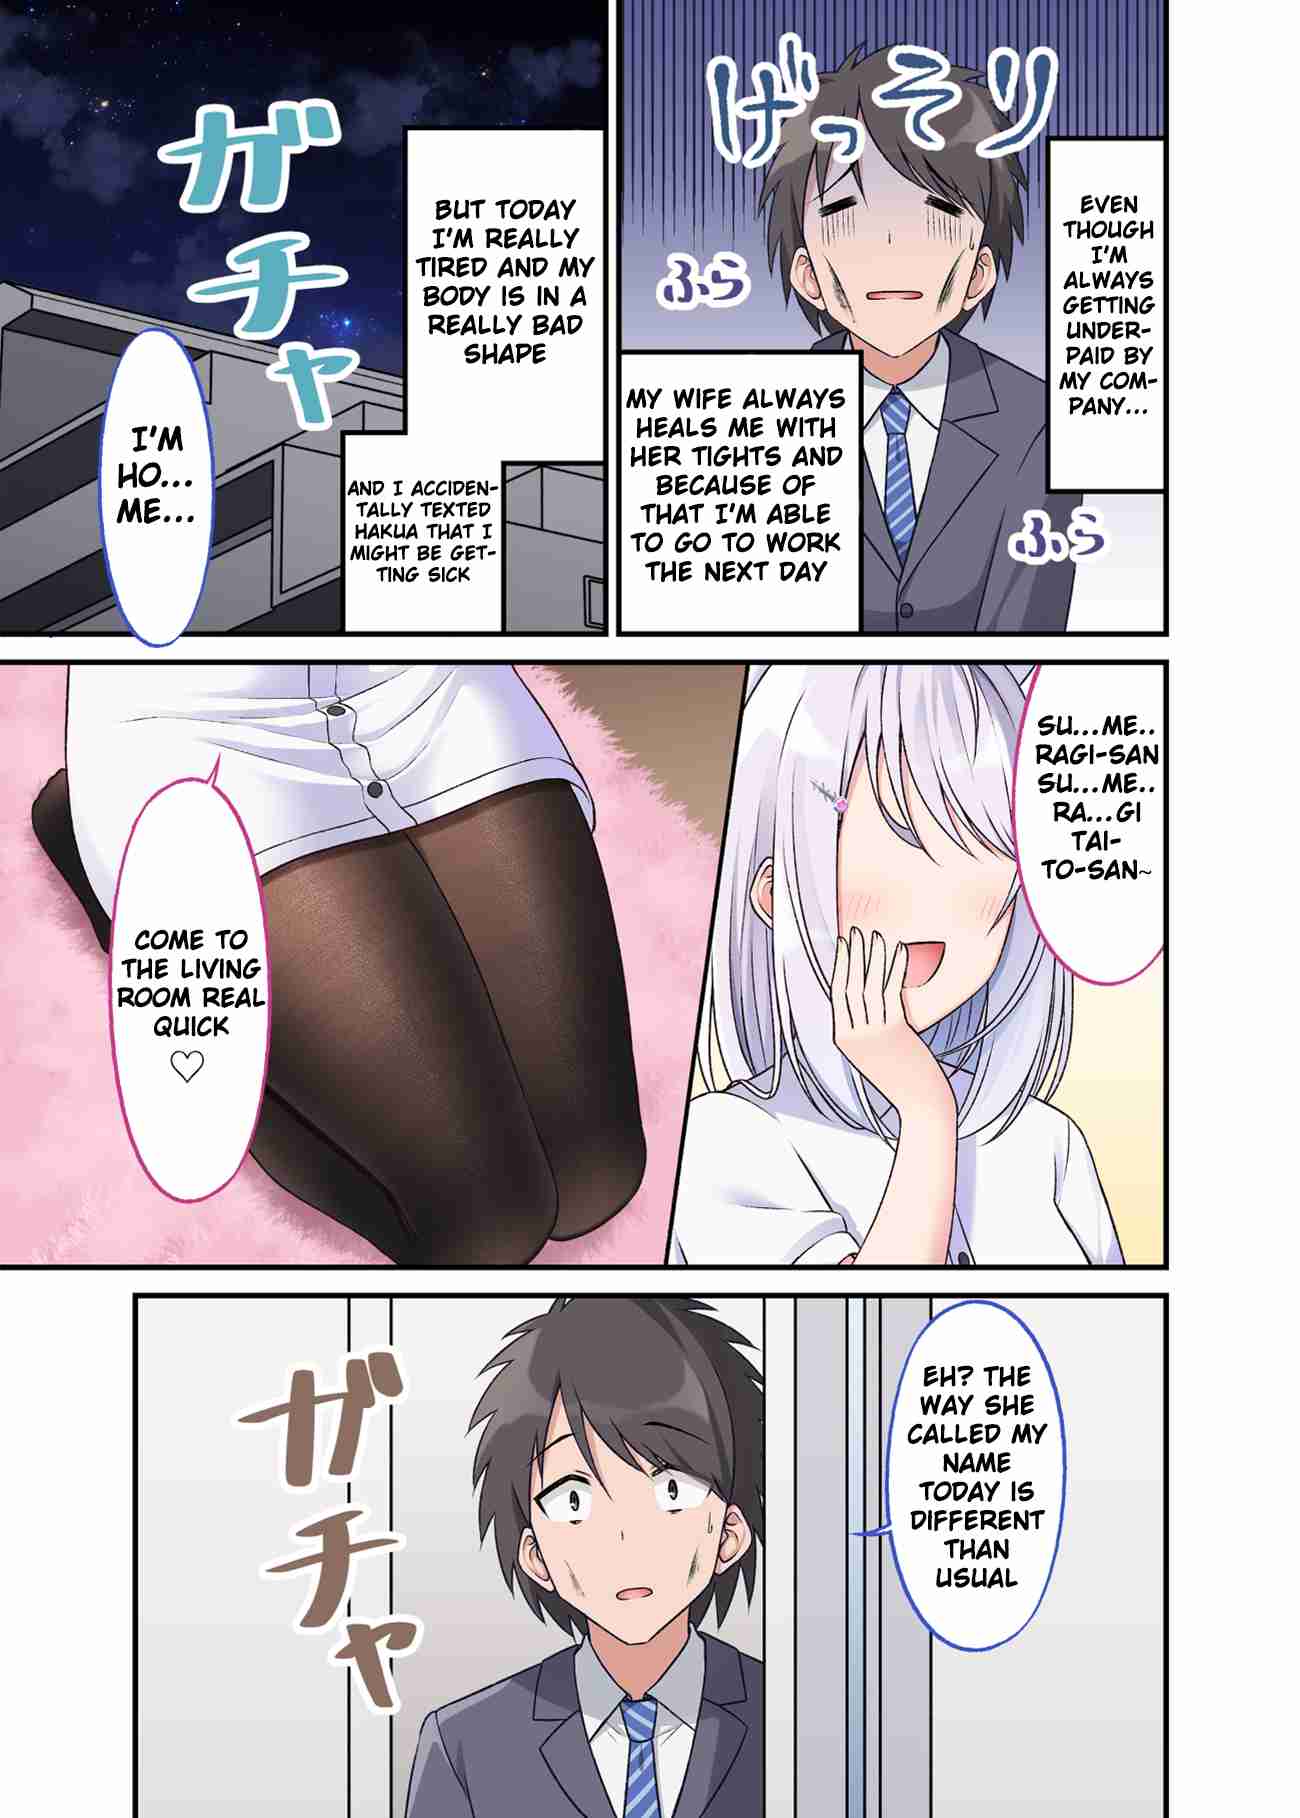 A Wife Who Heals with Tights Ch. 14